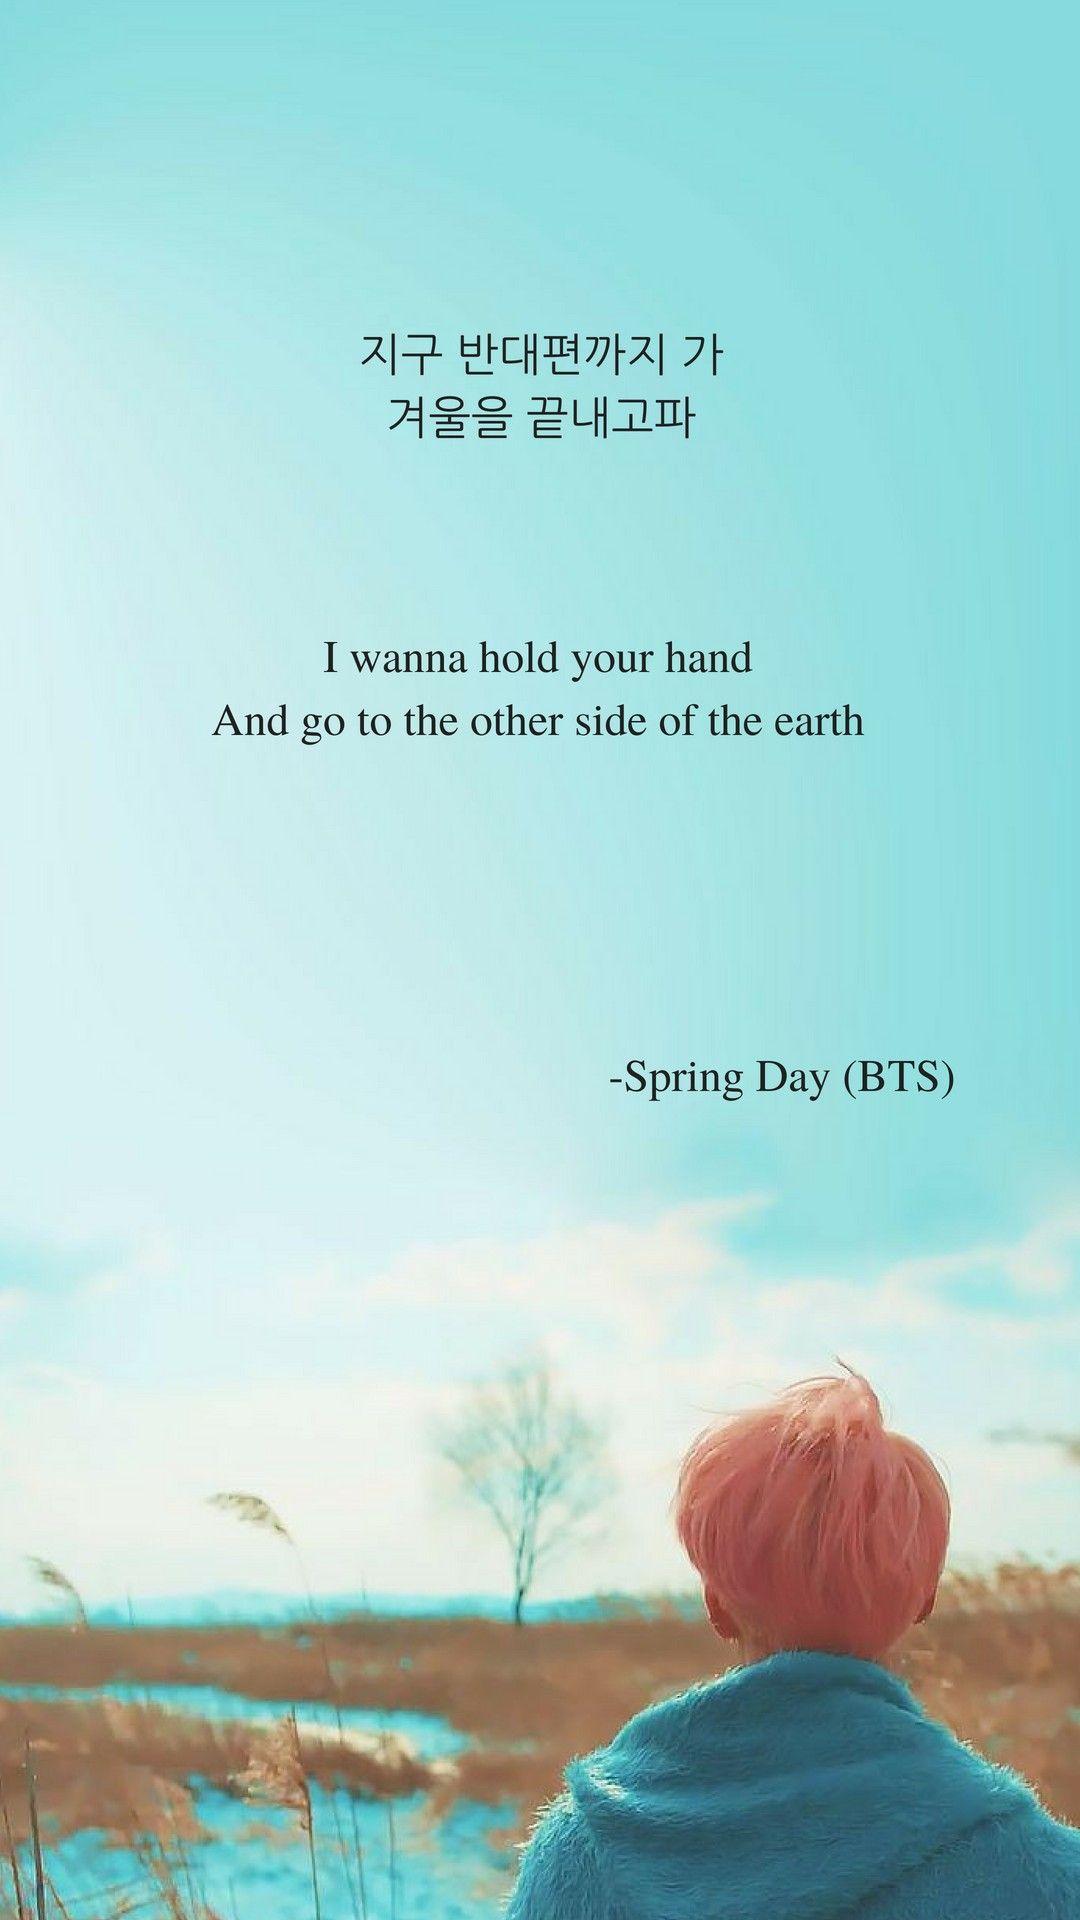 BTS Spring Day Wallpapers - Wallpaper Cave